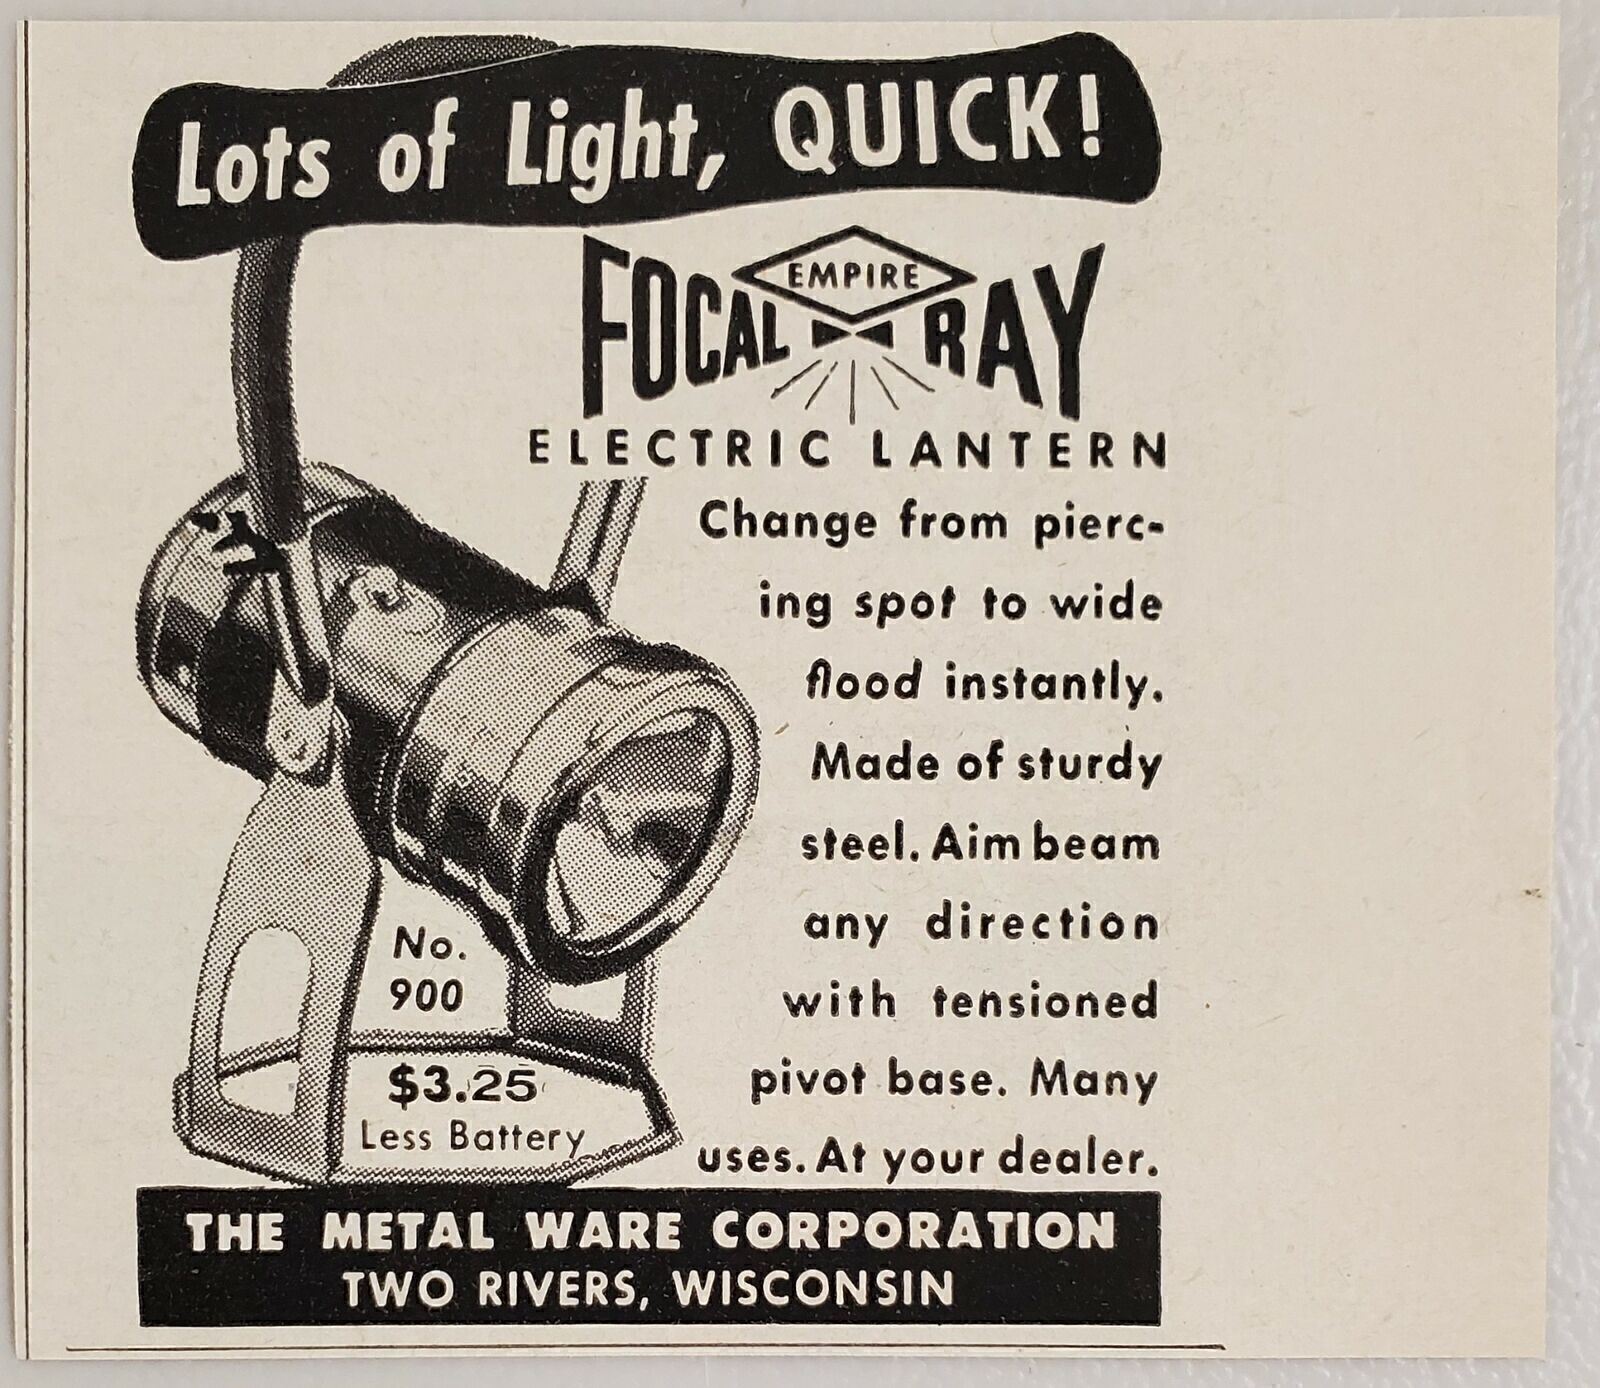 1949 Print Ad Empire Focal Ray Electric Lanterns Metal Ware Two Rivers,Wisconsin